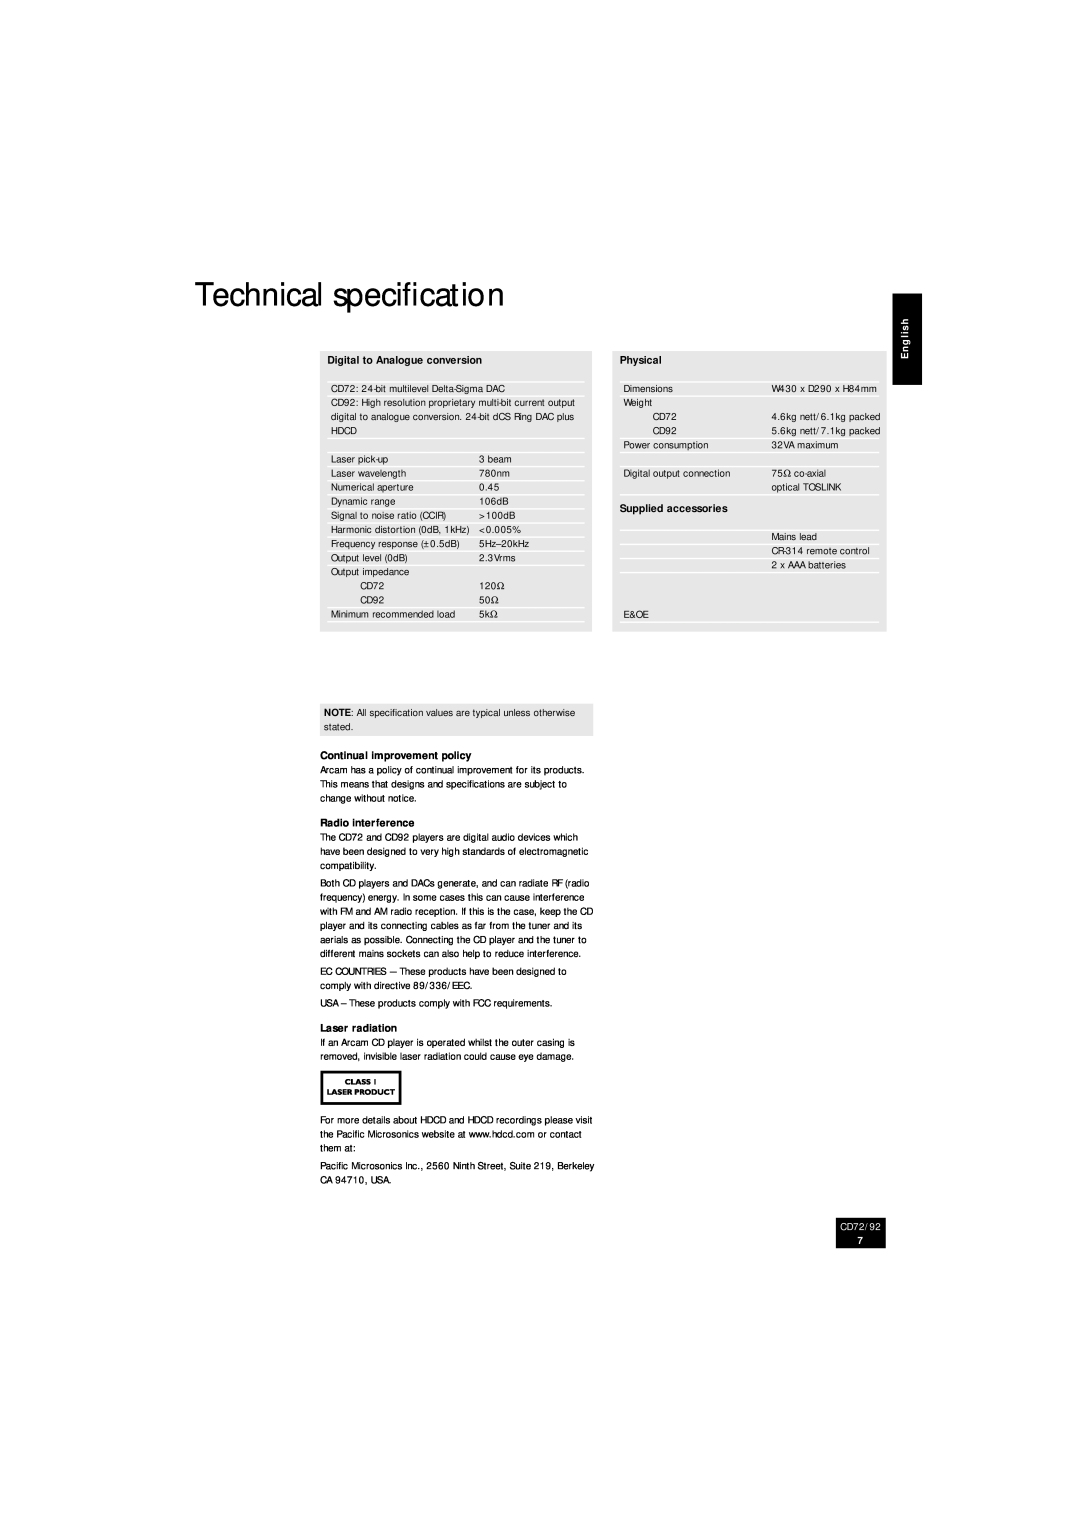 Arcam CD72 Technical speciﬁcation, Digital to Analogue conversion, Physical, Supplied accessories, Radio interference 